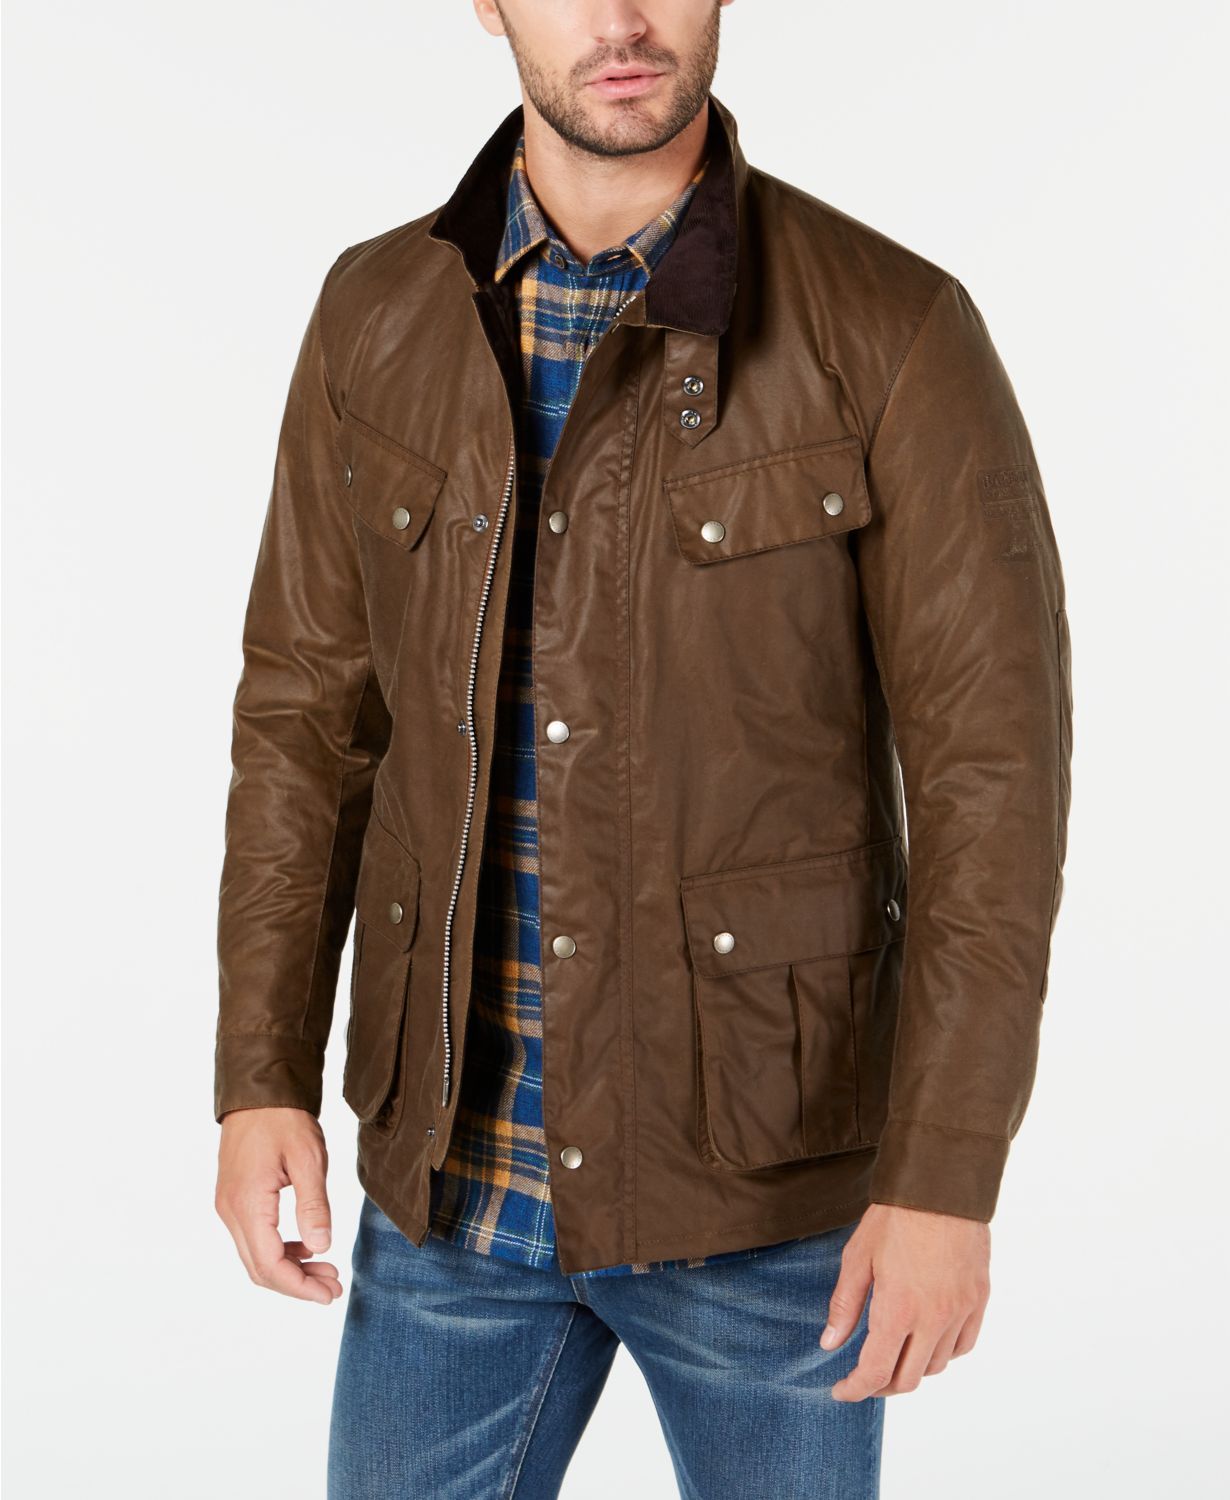 Barbour Launches New Collection Inspired By Steve McQueen